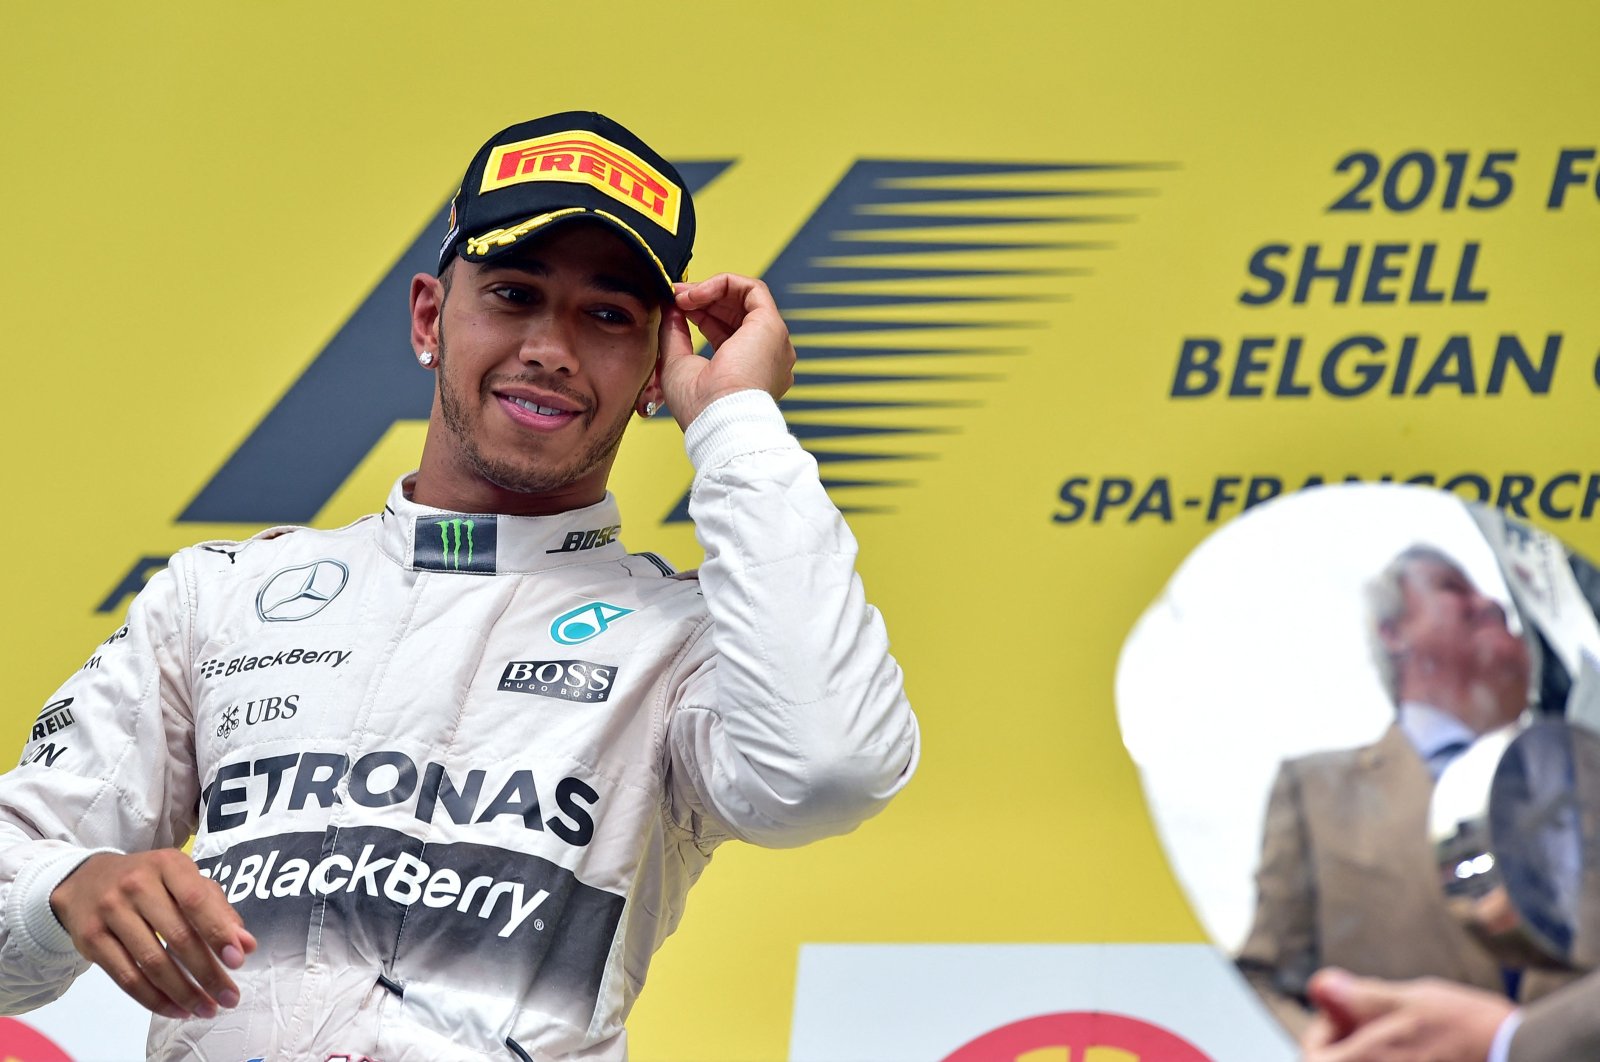 Mercedes AMG Petronas F1 Team&#039;s British driver Lewis Hamilton looks at the trophy as he celebrates winning on the podium at the Spa-Francorchamps circuit after the Belgian Formula One Grand Prix, in Spa, Belgium, Aug. 23, 2015. (AFP File Photo)